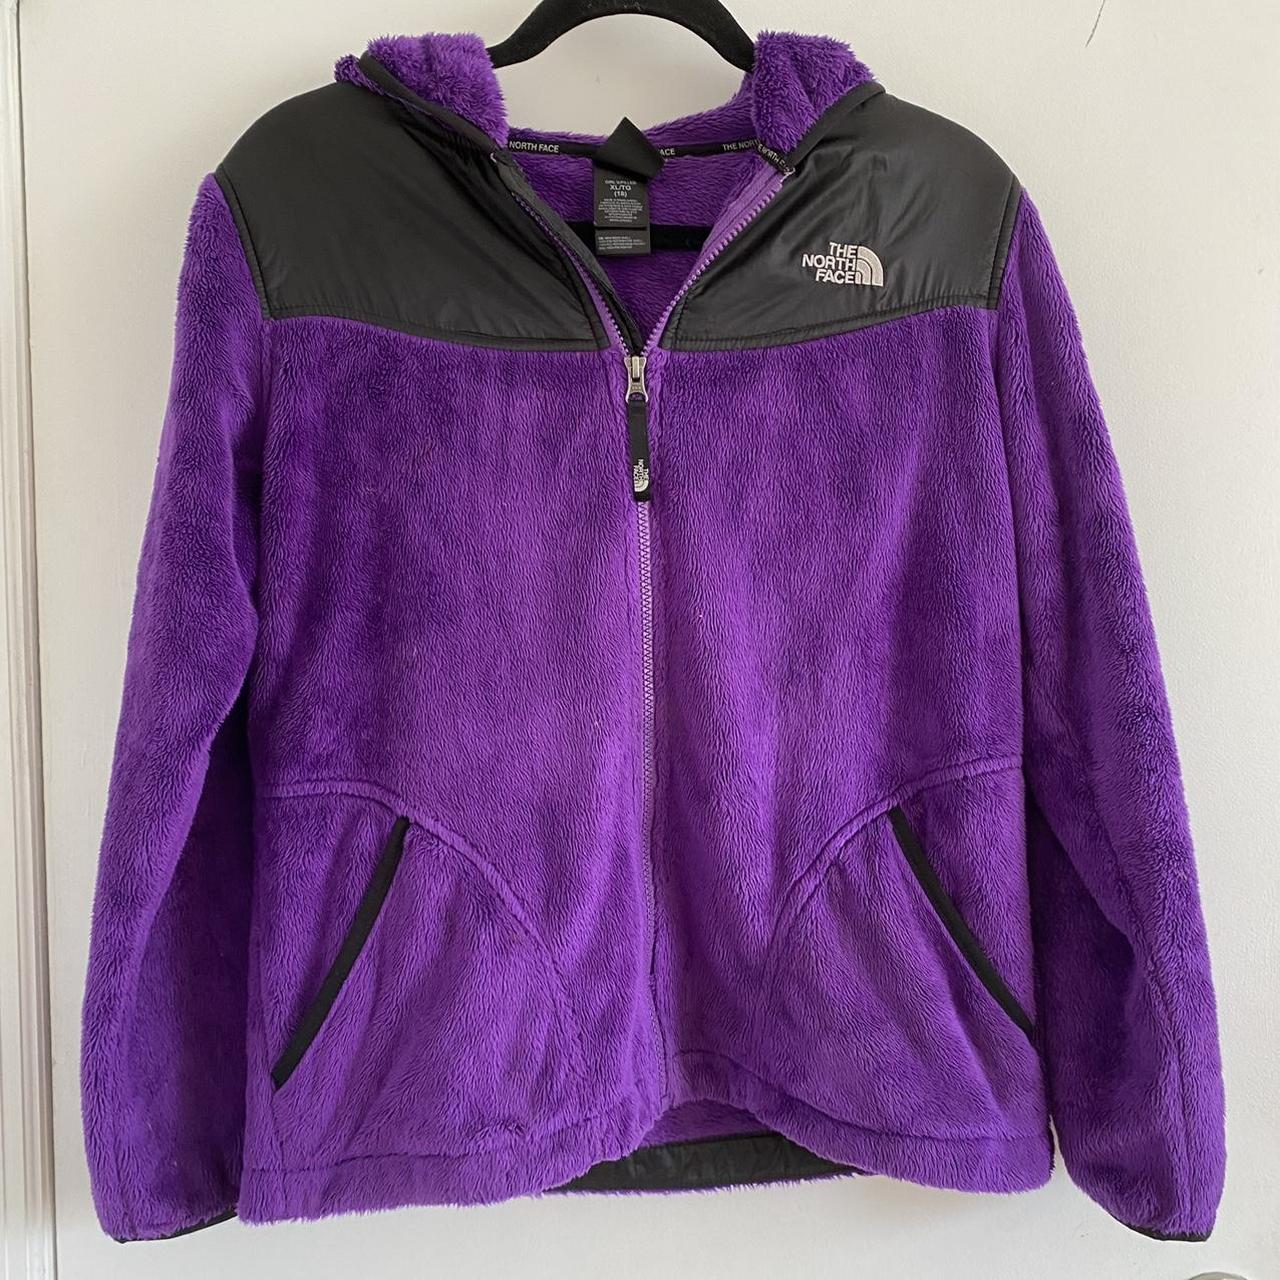 THE NORTH FACE FURRY PURPLE JACKET- super warm and... - Depop